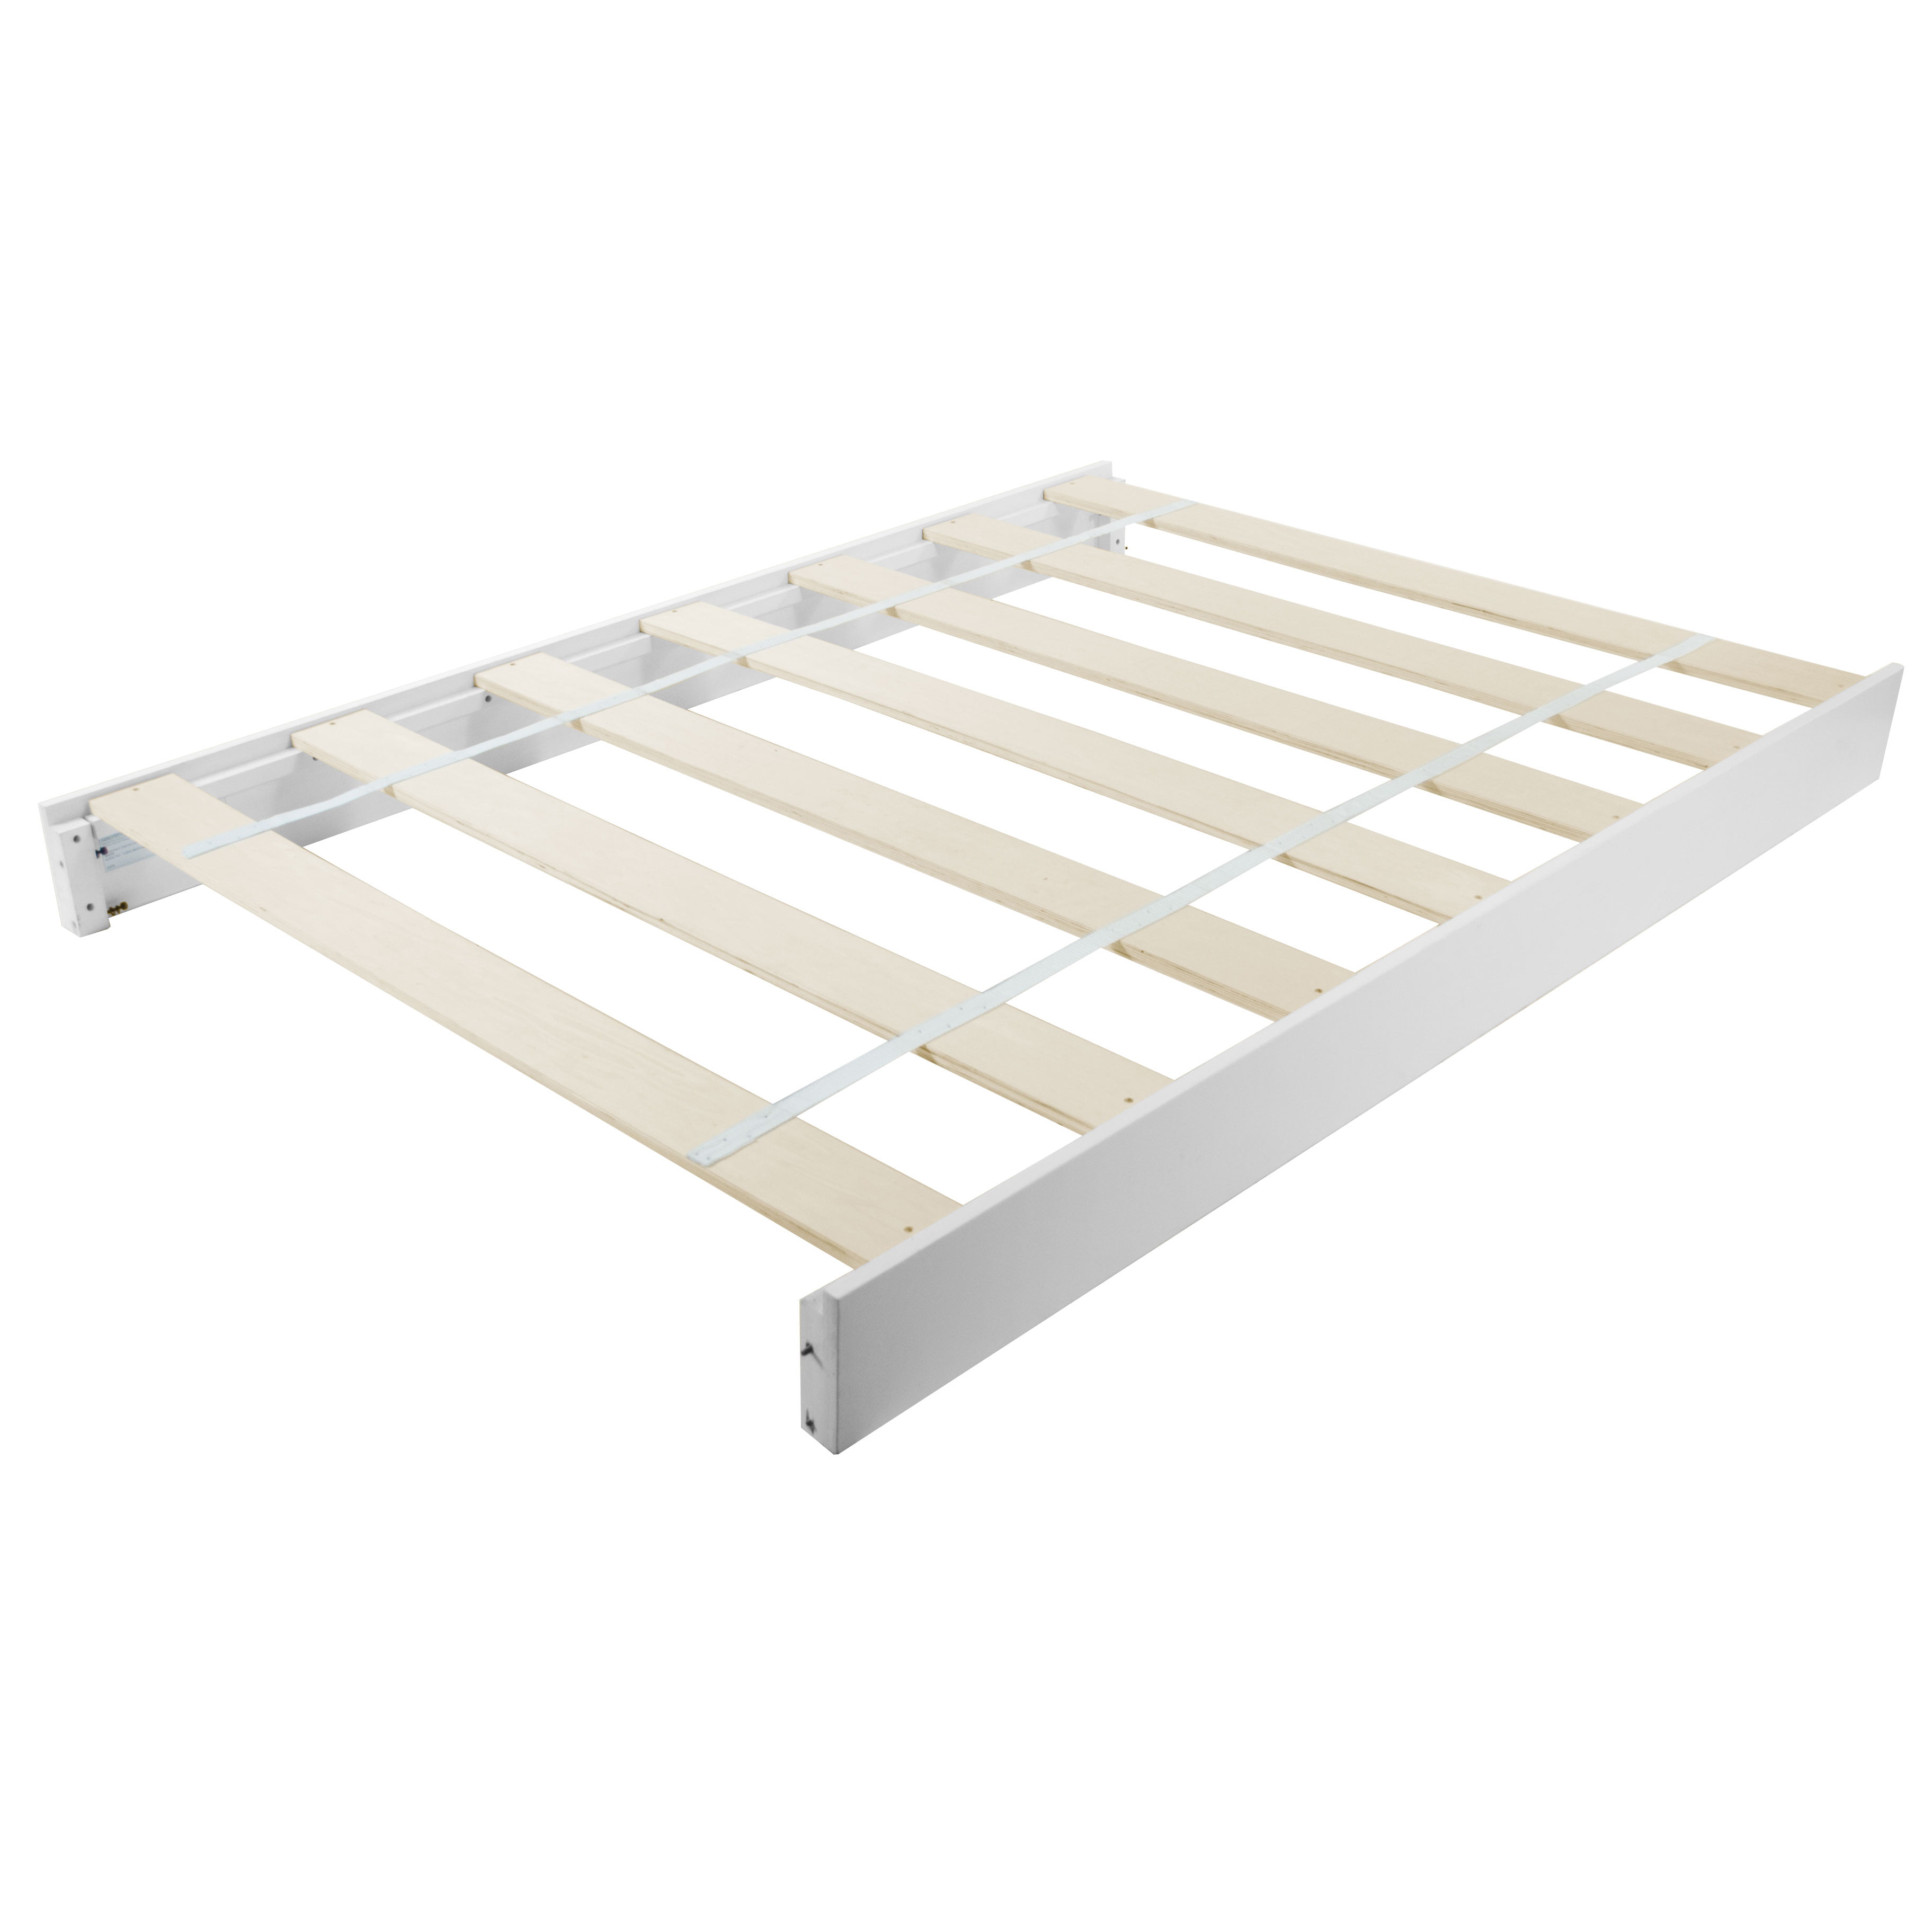 Kolcraft Universal 4in1 Full Size Bed Rails, Crib Accessory, Conversion Kit, BuiltInHardware